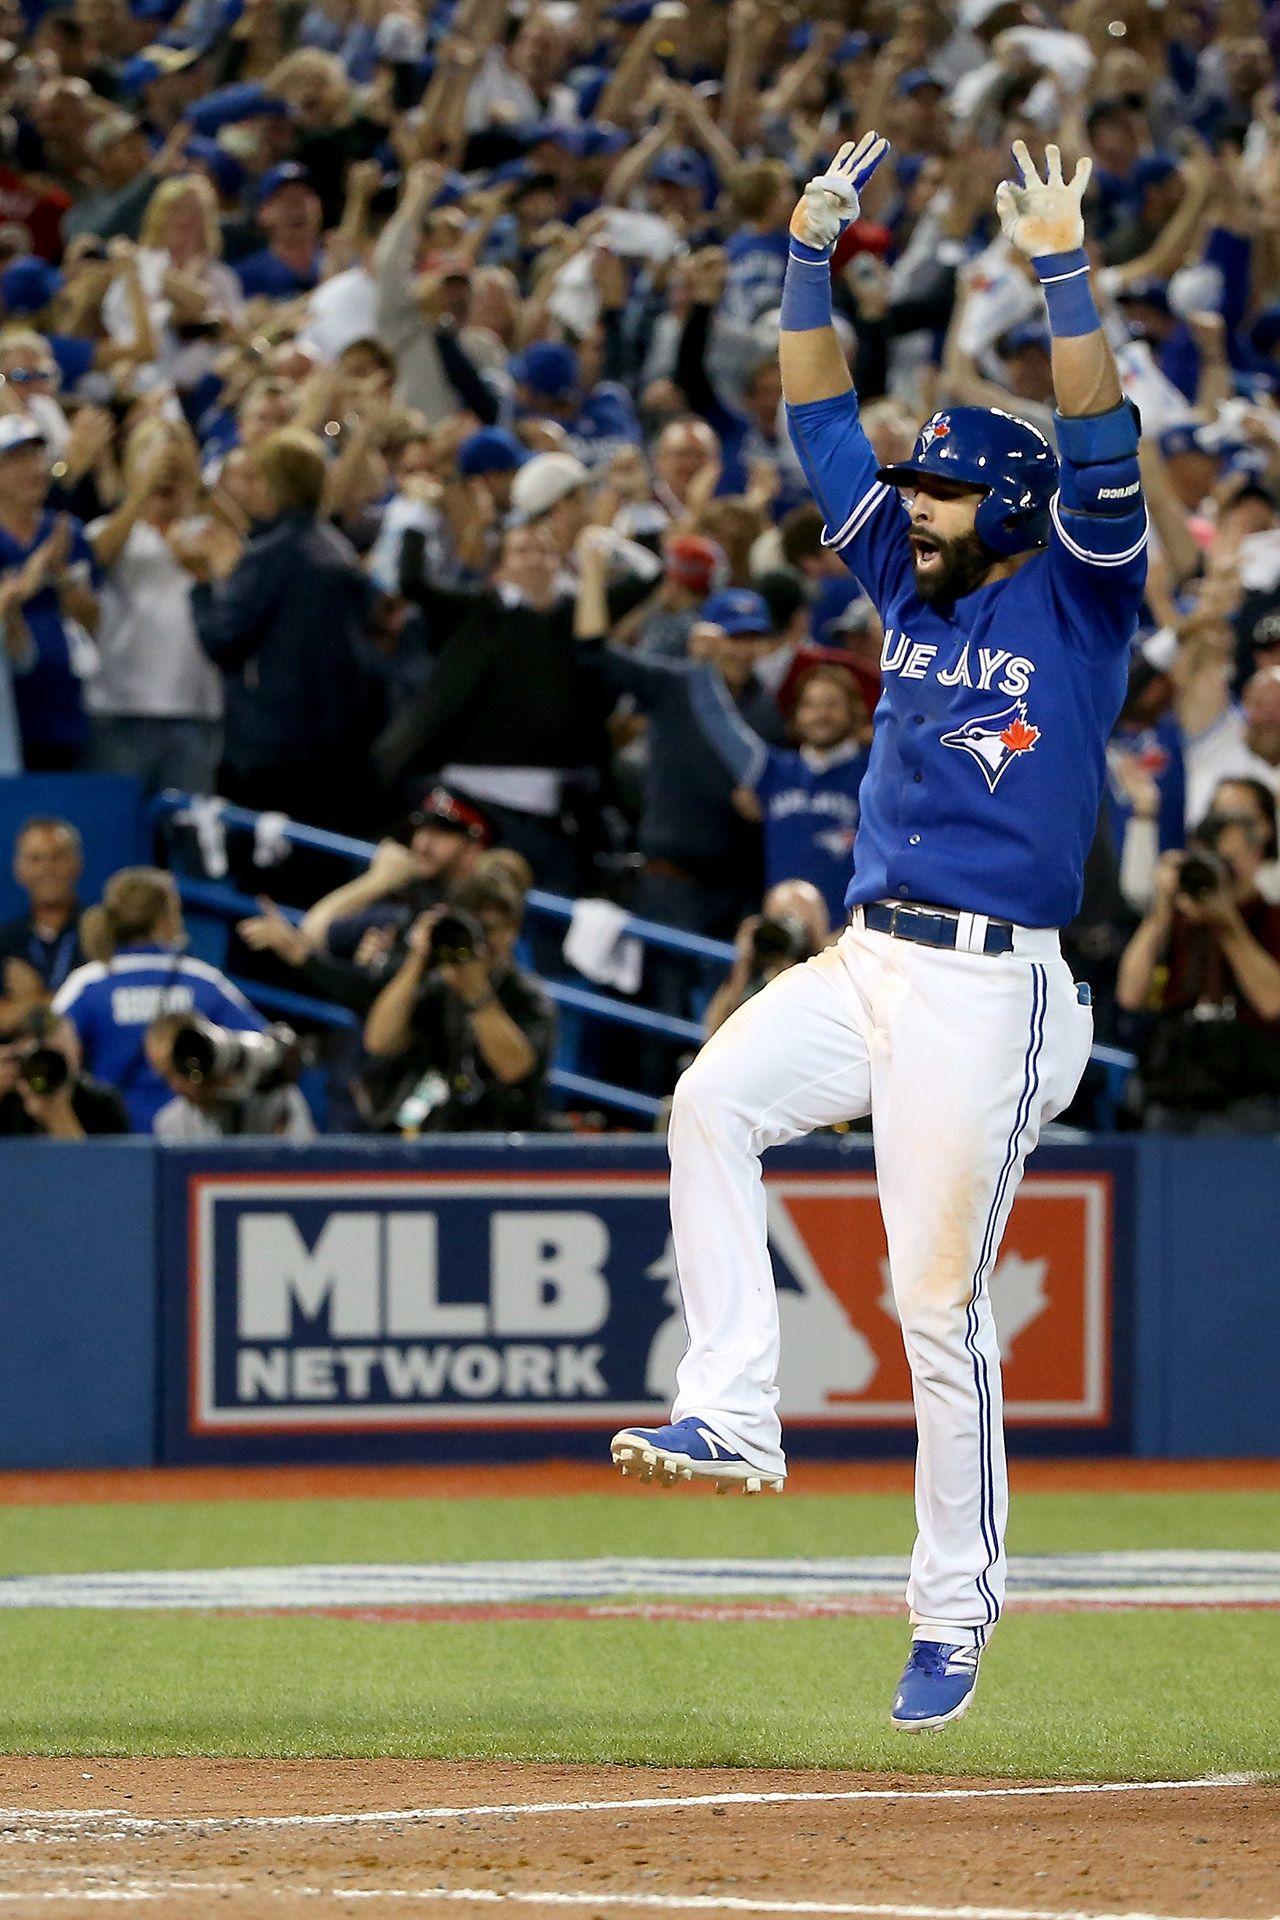 Jose Bautista Punctuated A Roller Coaster Seventh Inning With A Bat